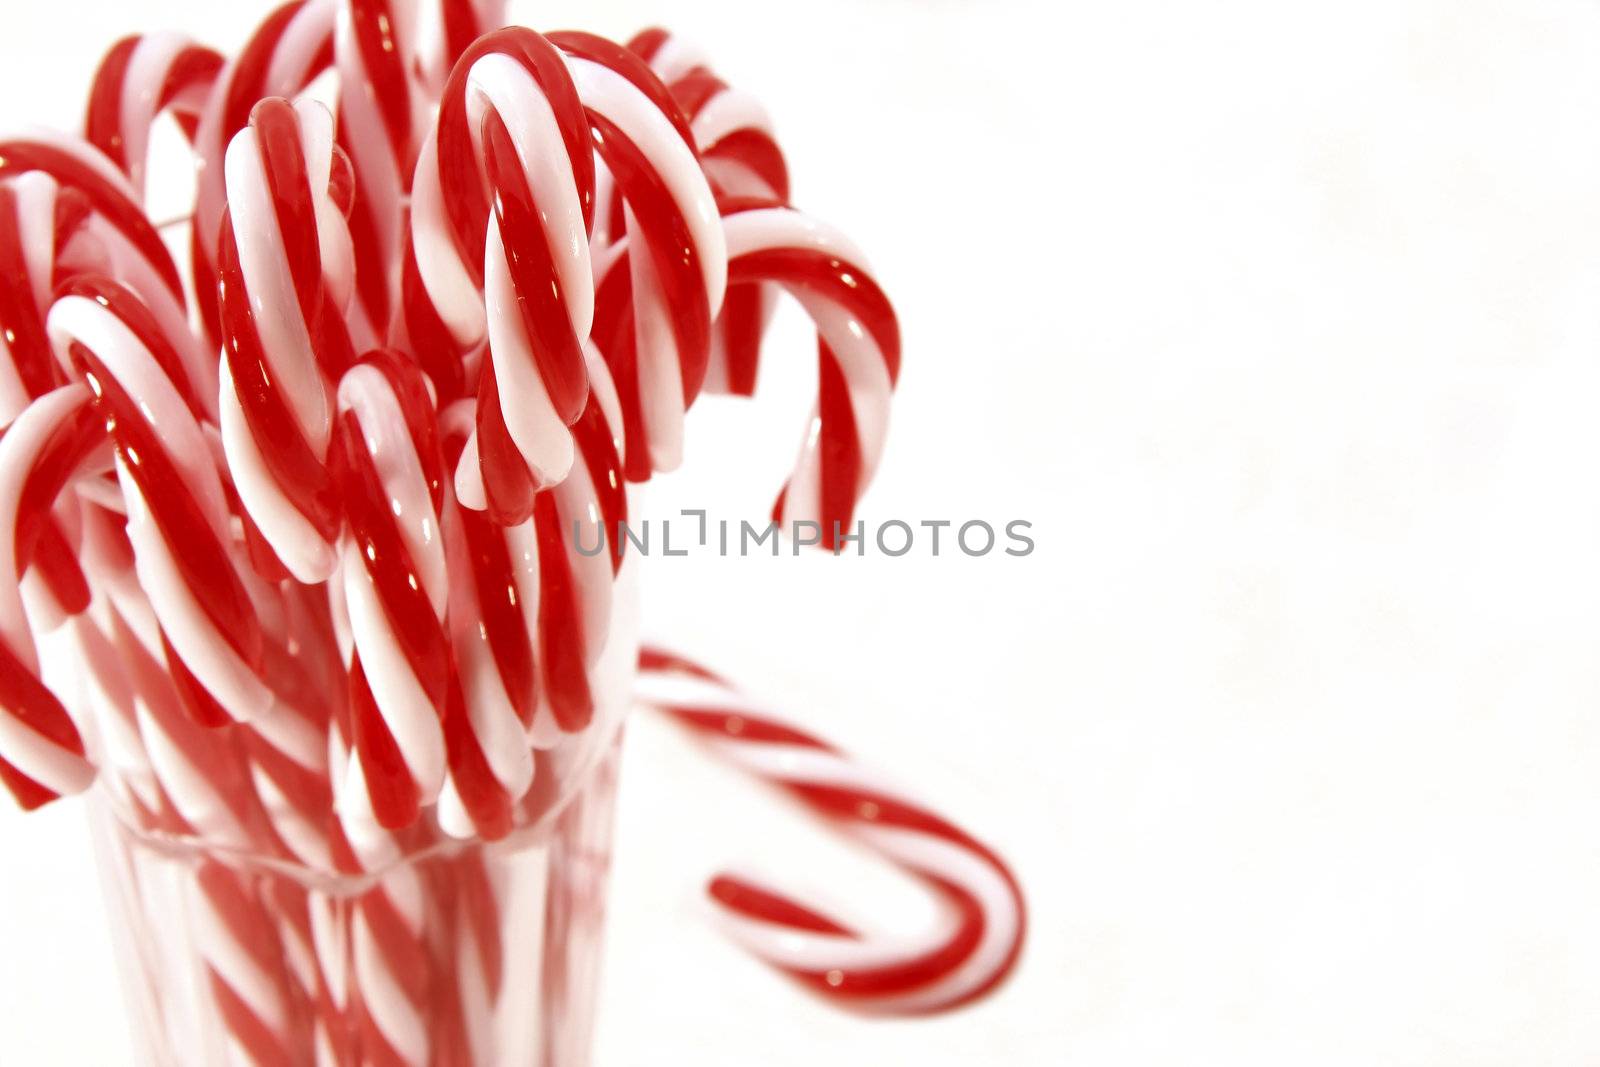 Lots of candy canes on isolated background